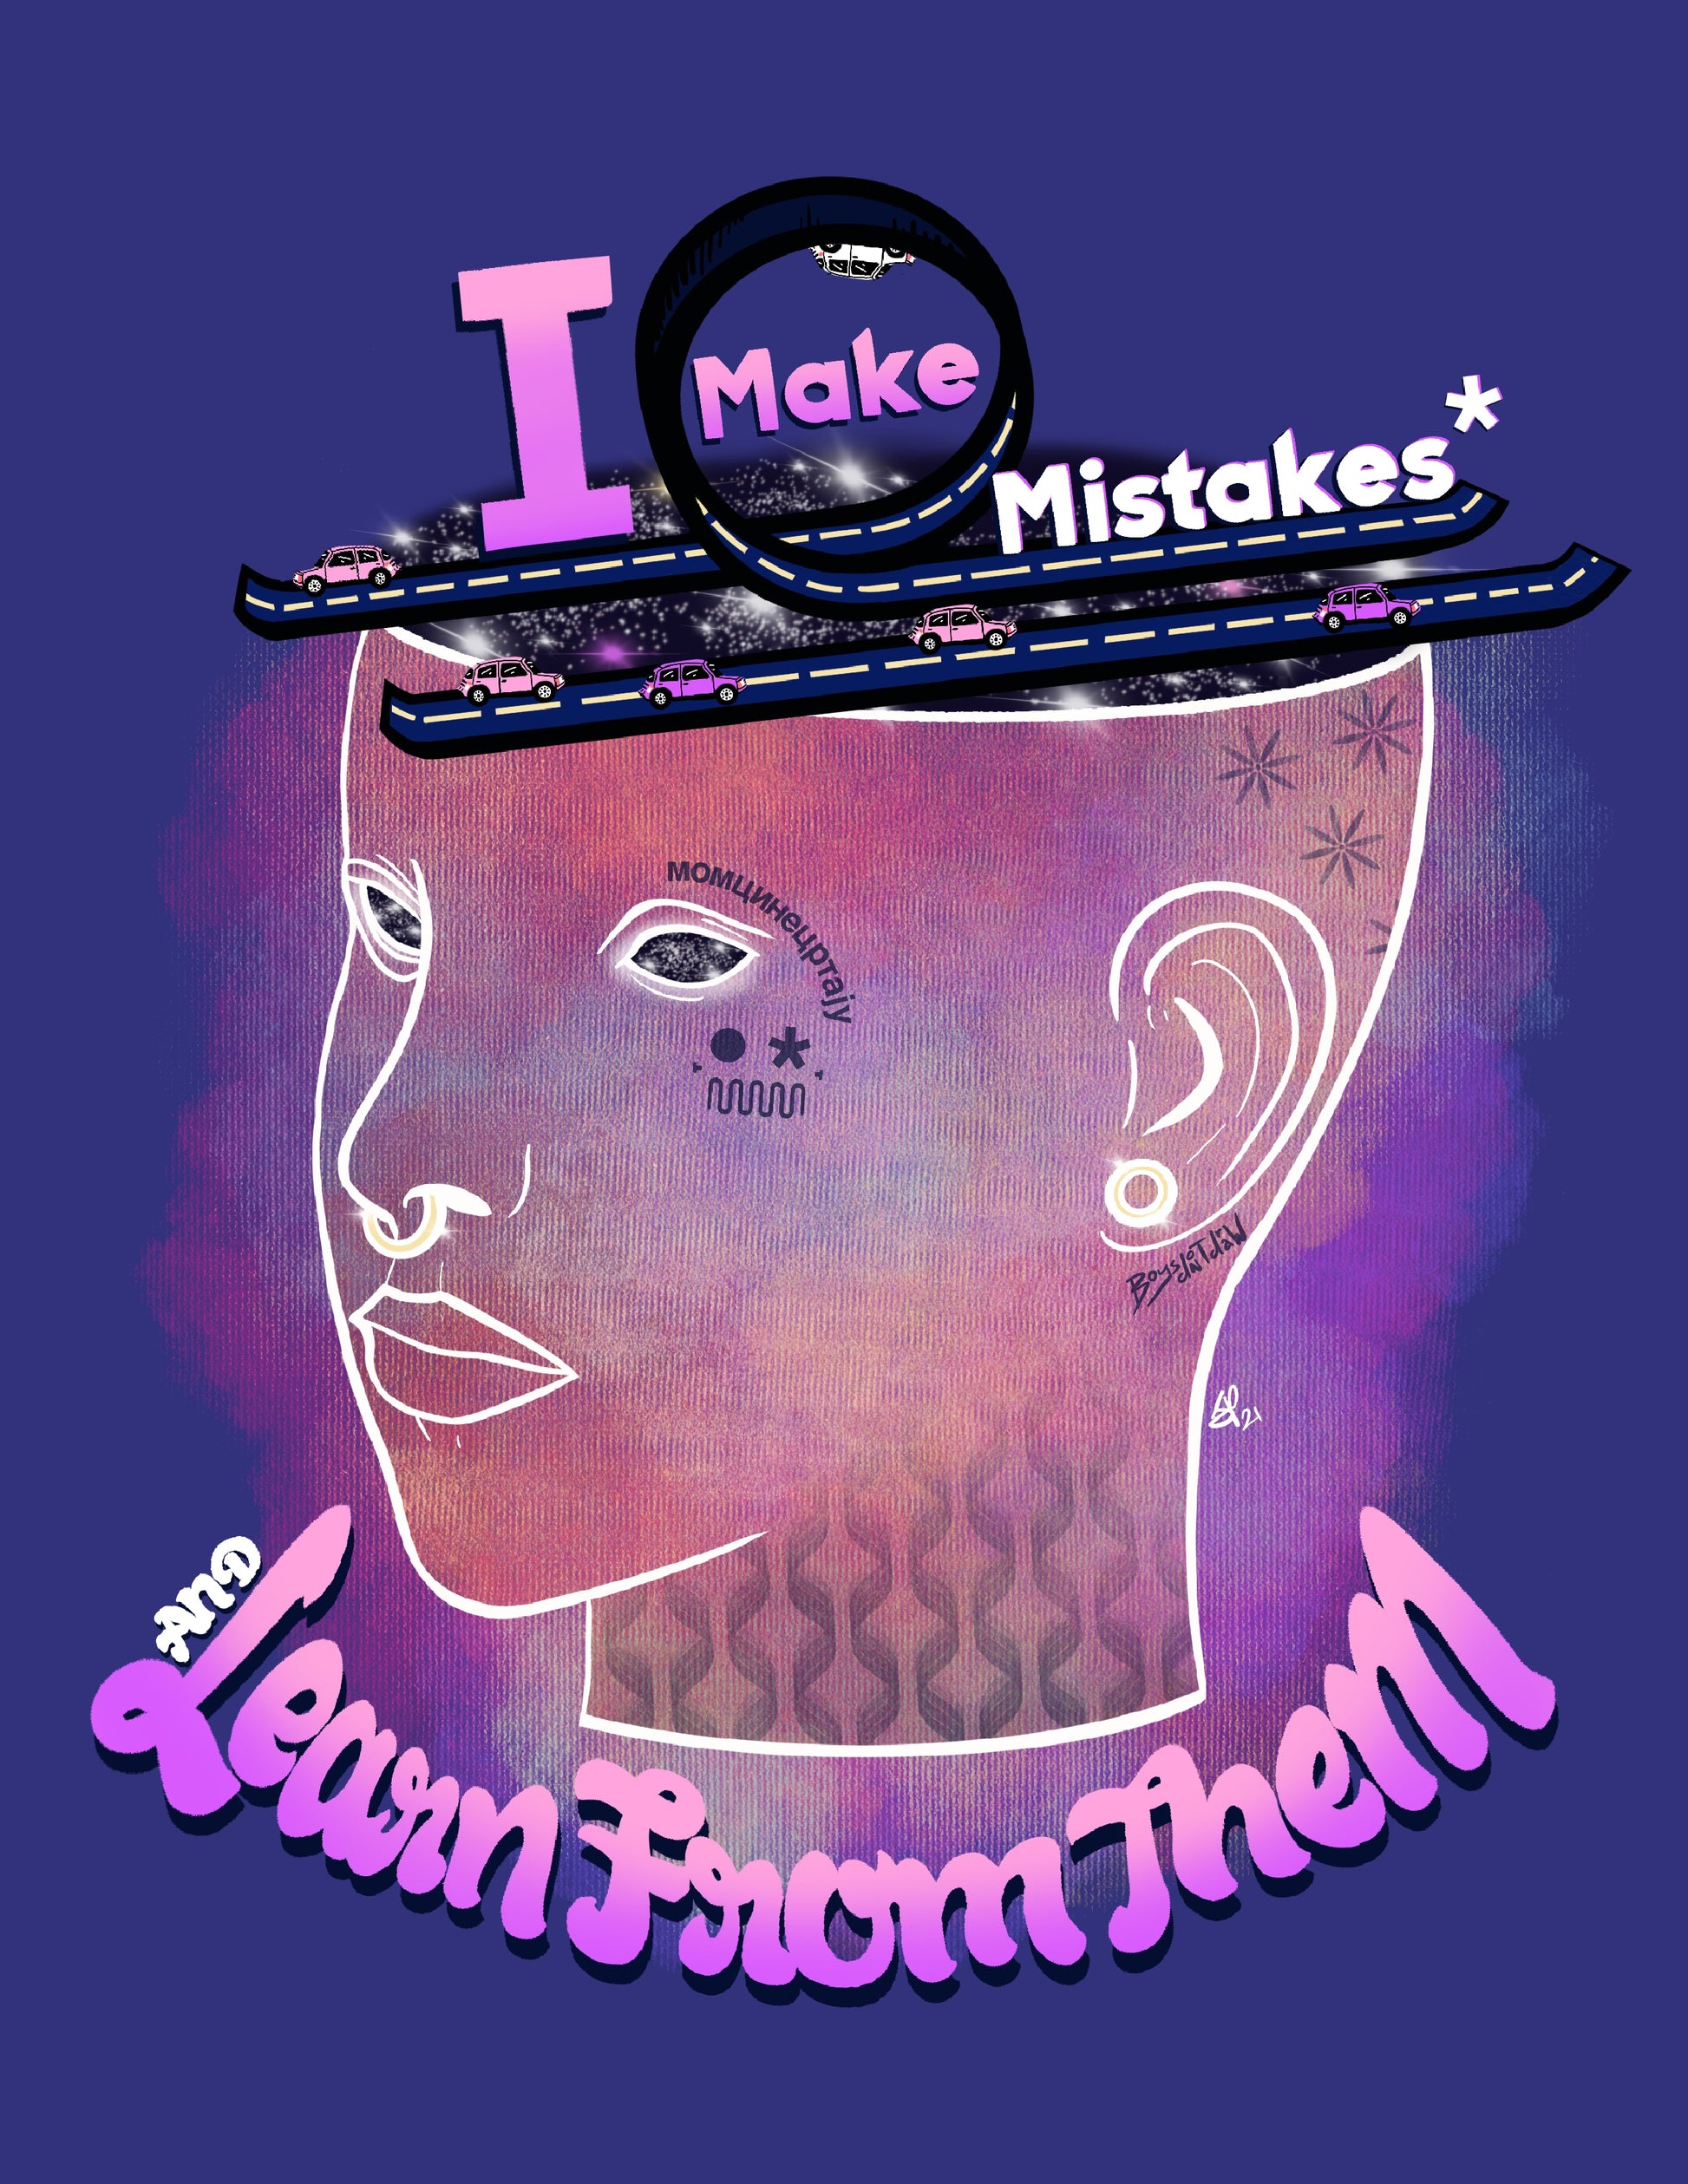 I MAKE MISTAKES AND LEARN FROM THEM - Button by BOYSDONTDRAW